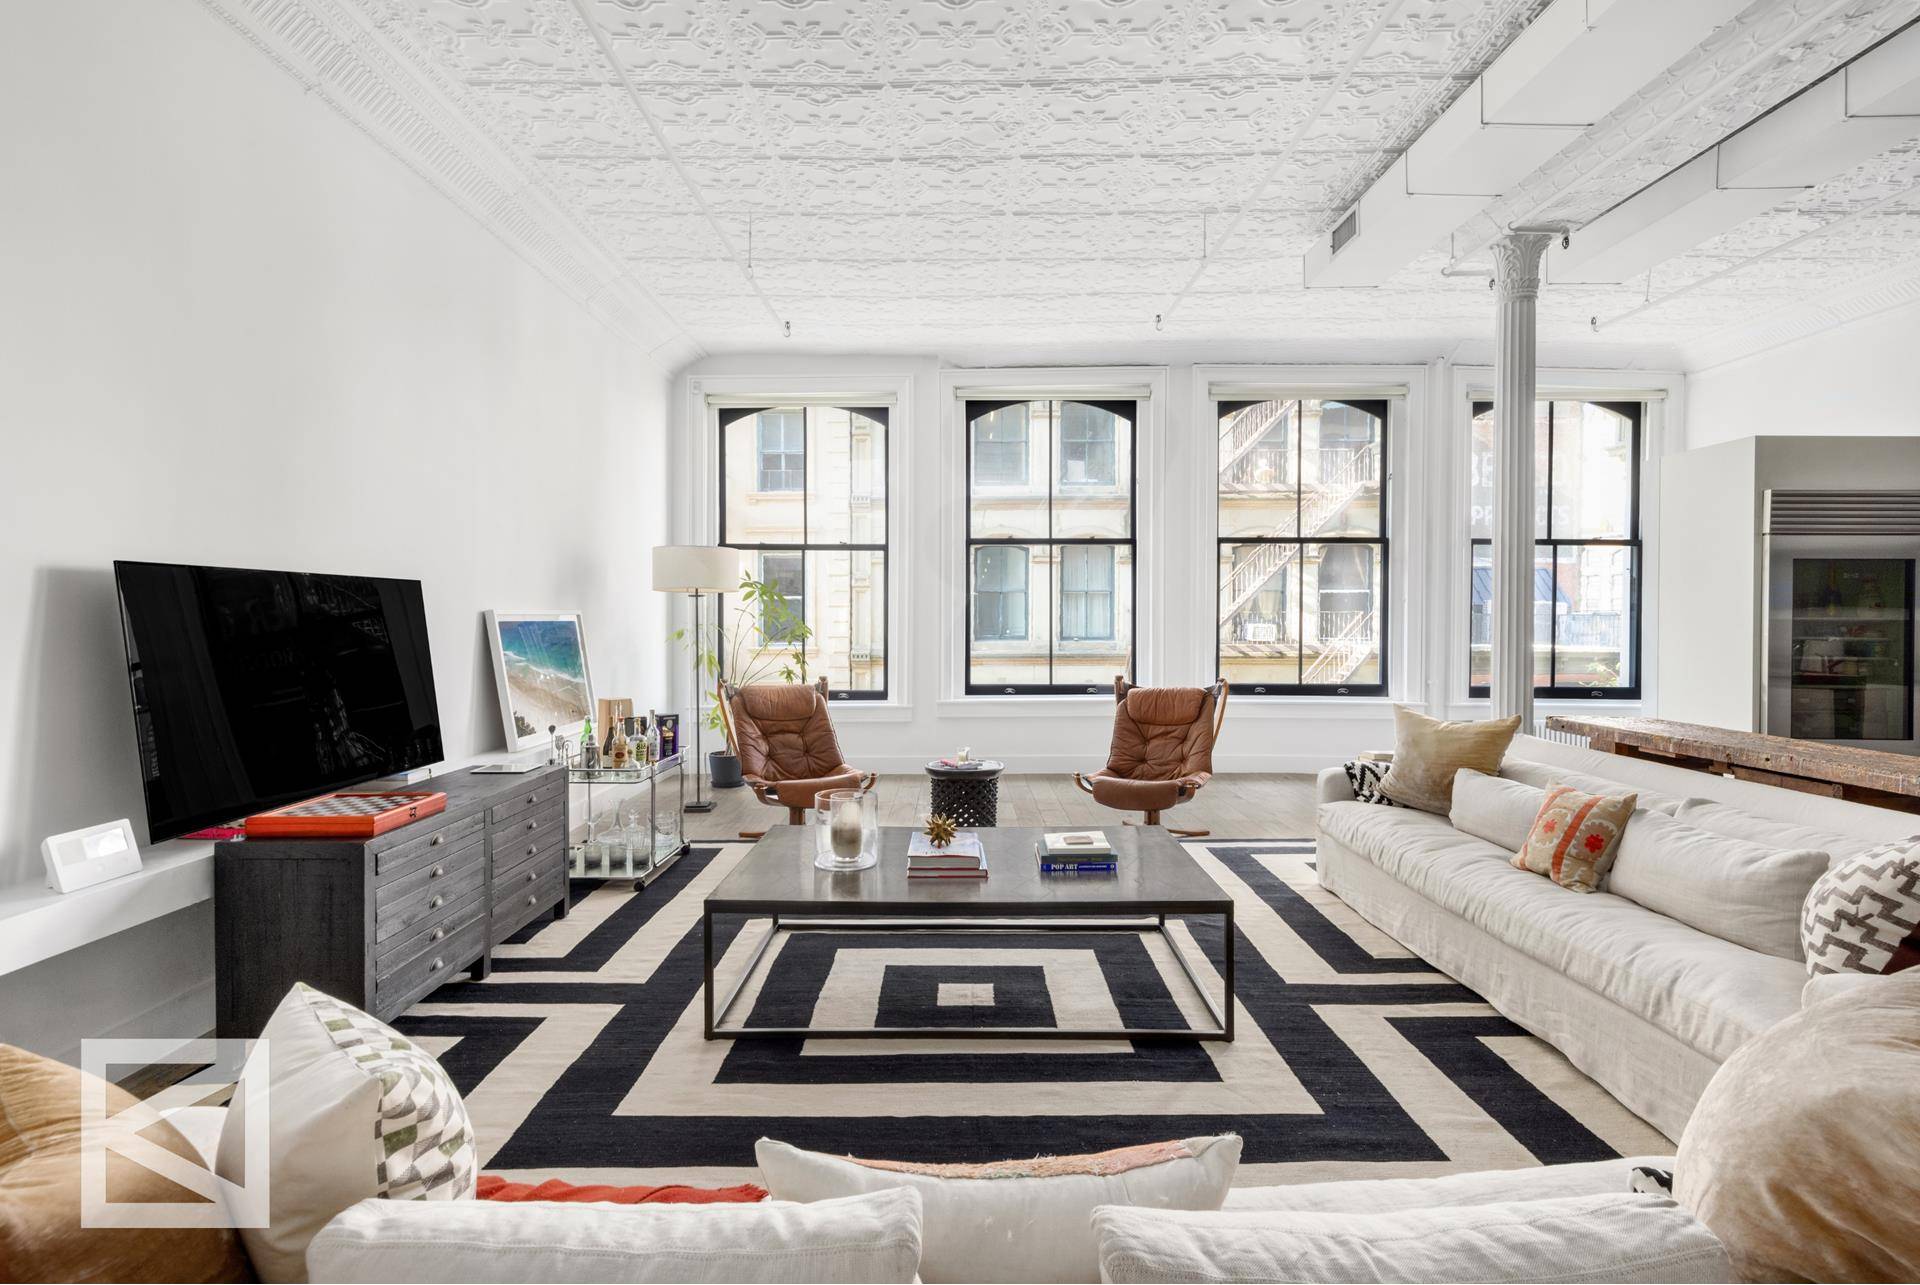 Nestled on one of the most desirable streets in Tribeca, this 5 story, cast iron beauty sits apart.